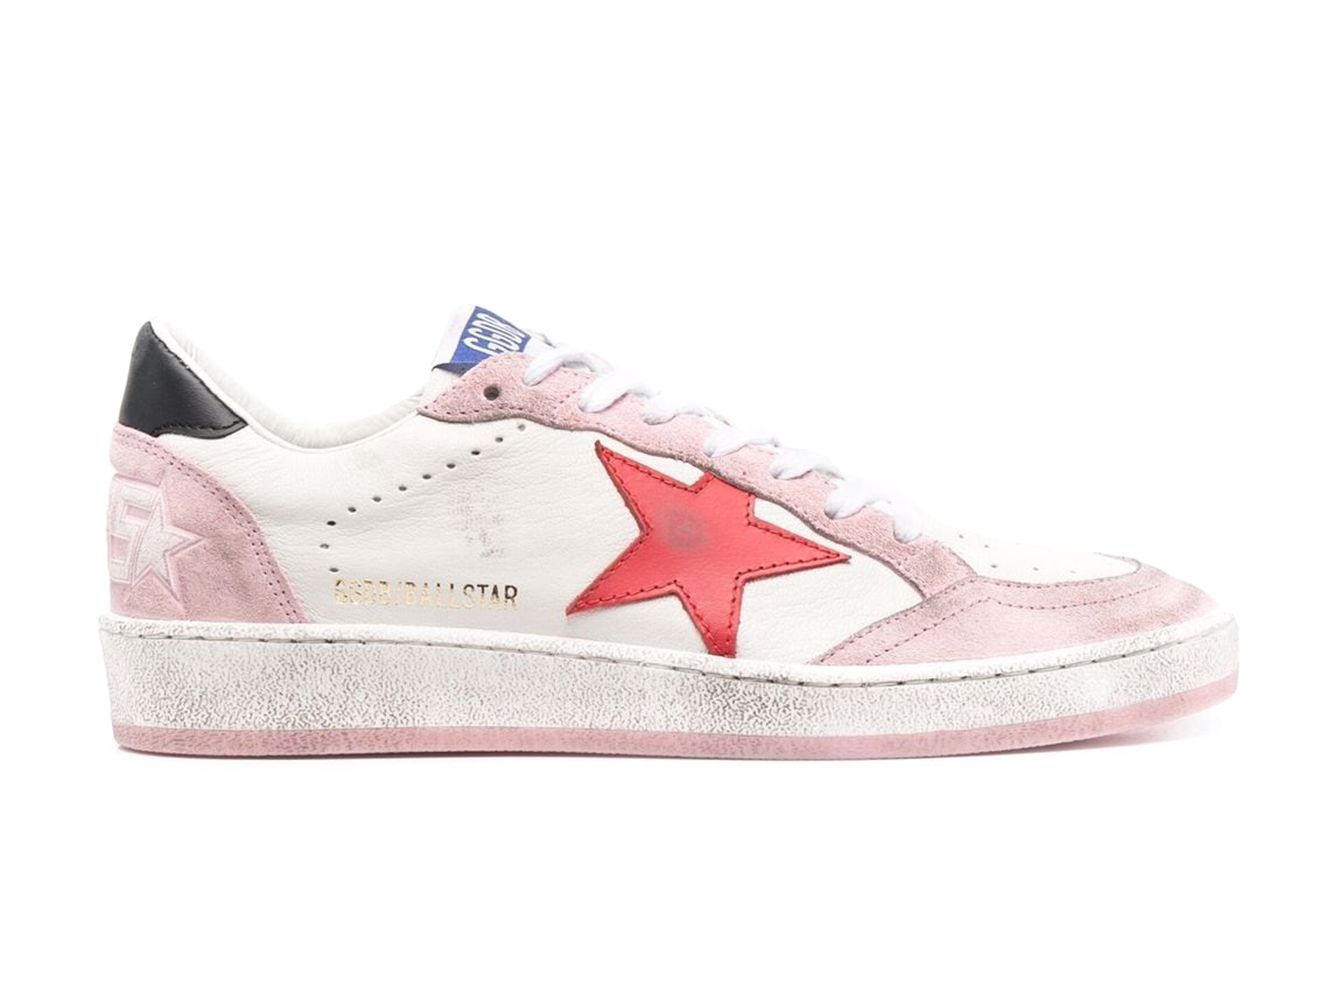 Golden Goose Ball-Star low White Pink Red (Women's) | StockX